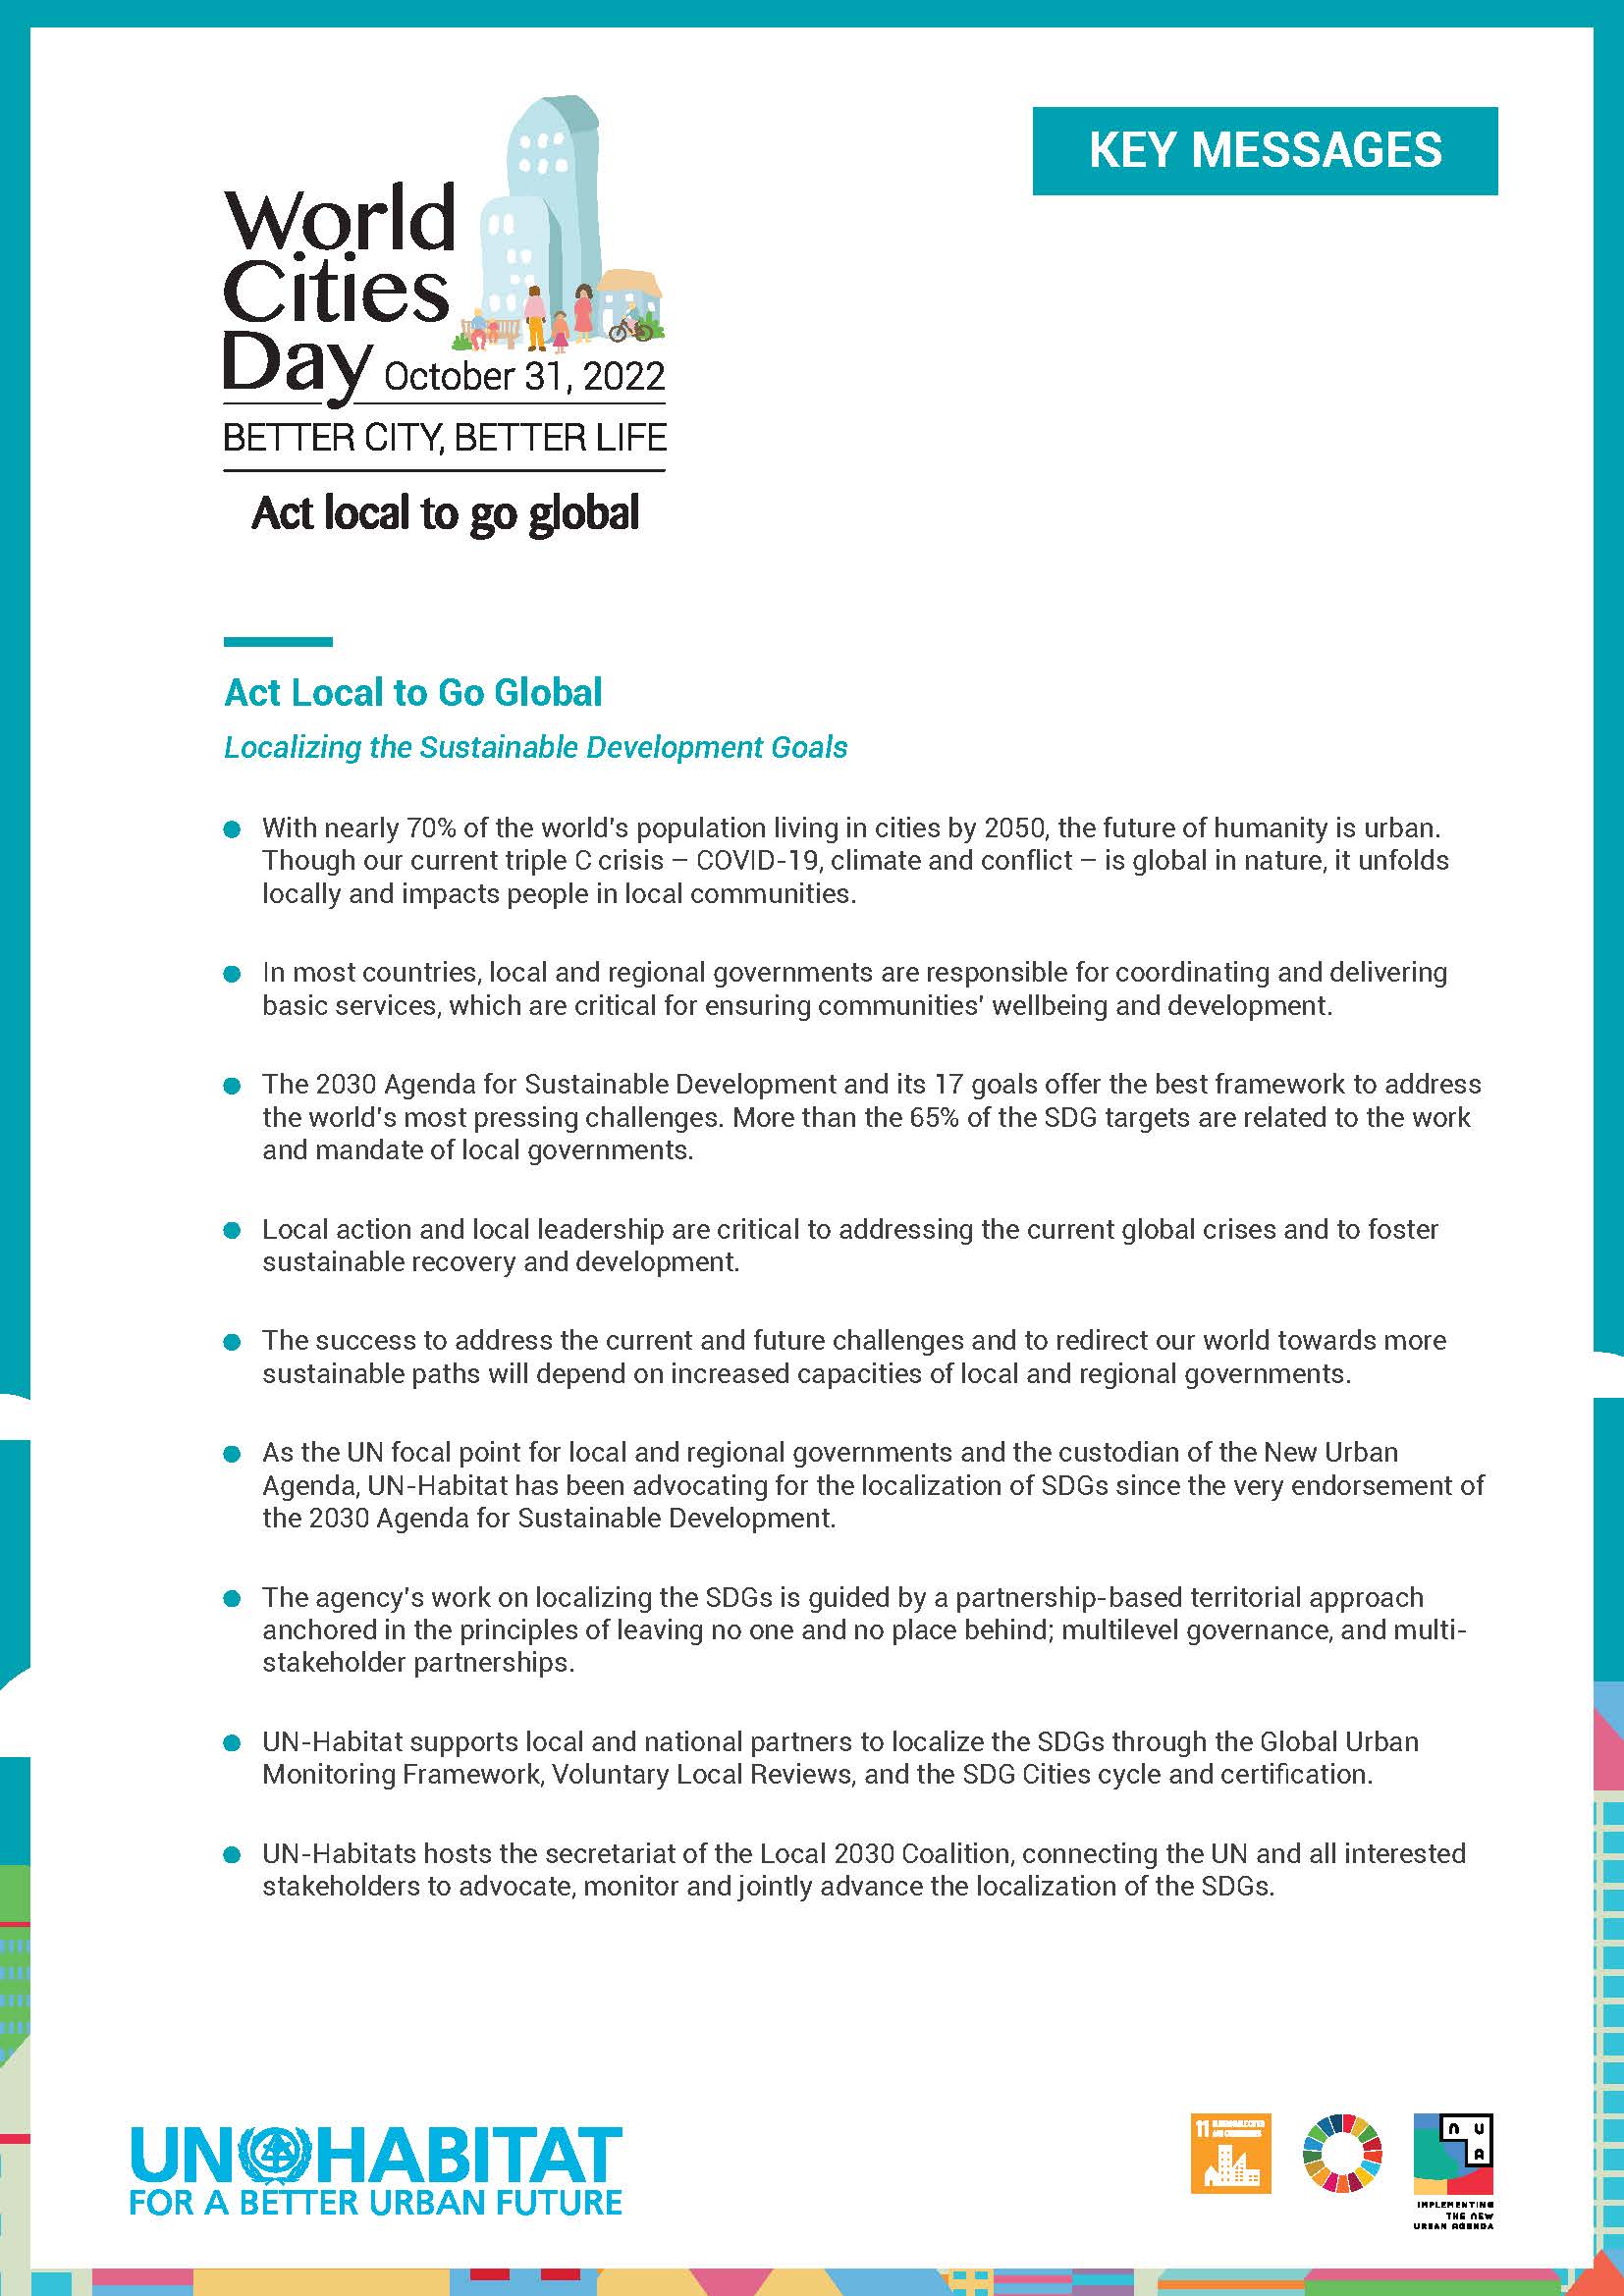 World Cities Day - Key Messages